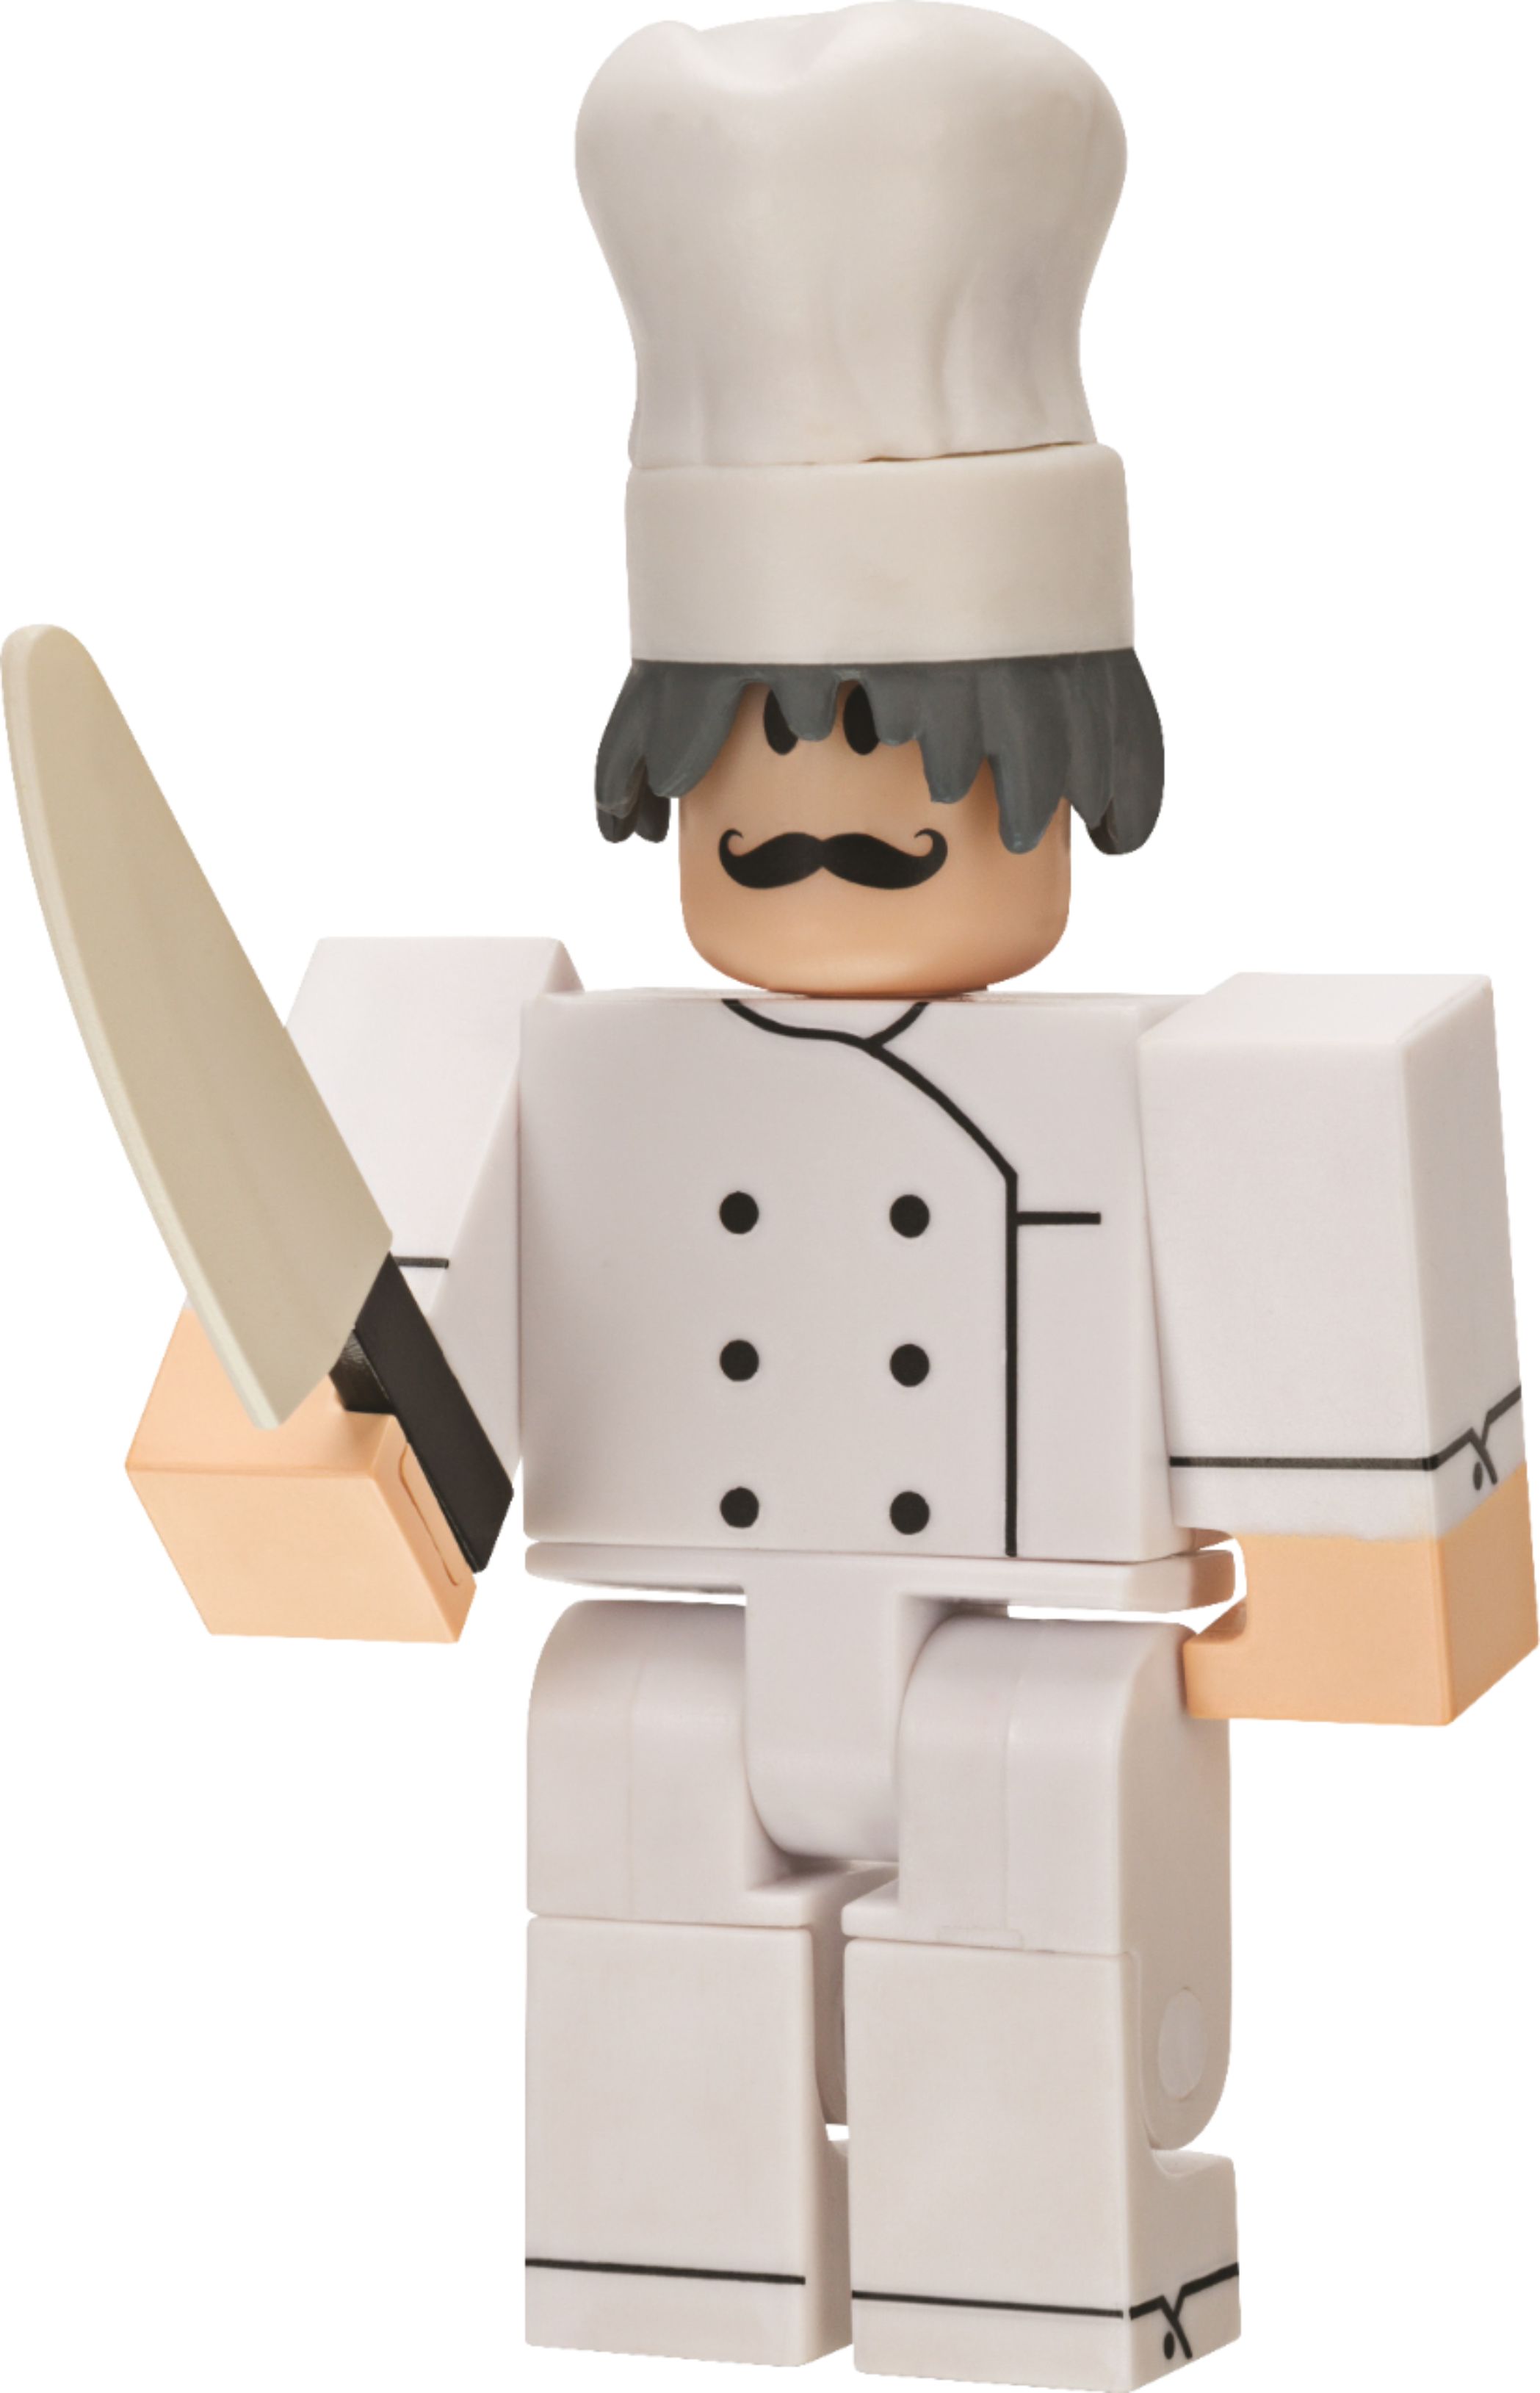 Roblox Series 6 Mystery Figure Styles May Vary Rob0173 Best Buy - roblox blind box figure series 6